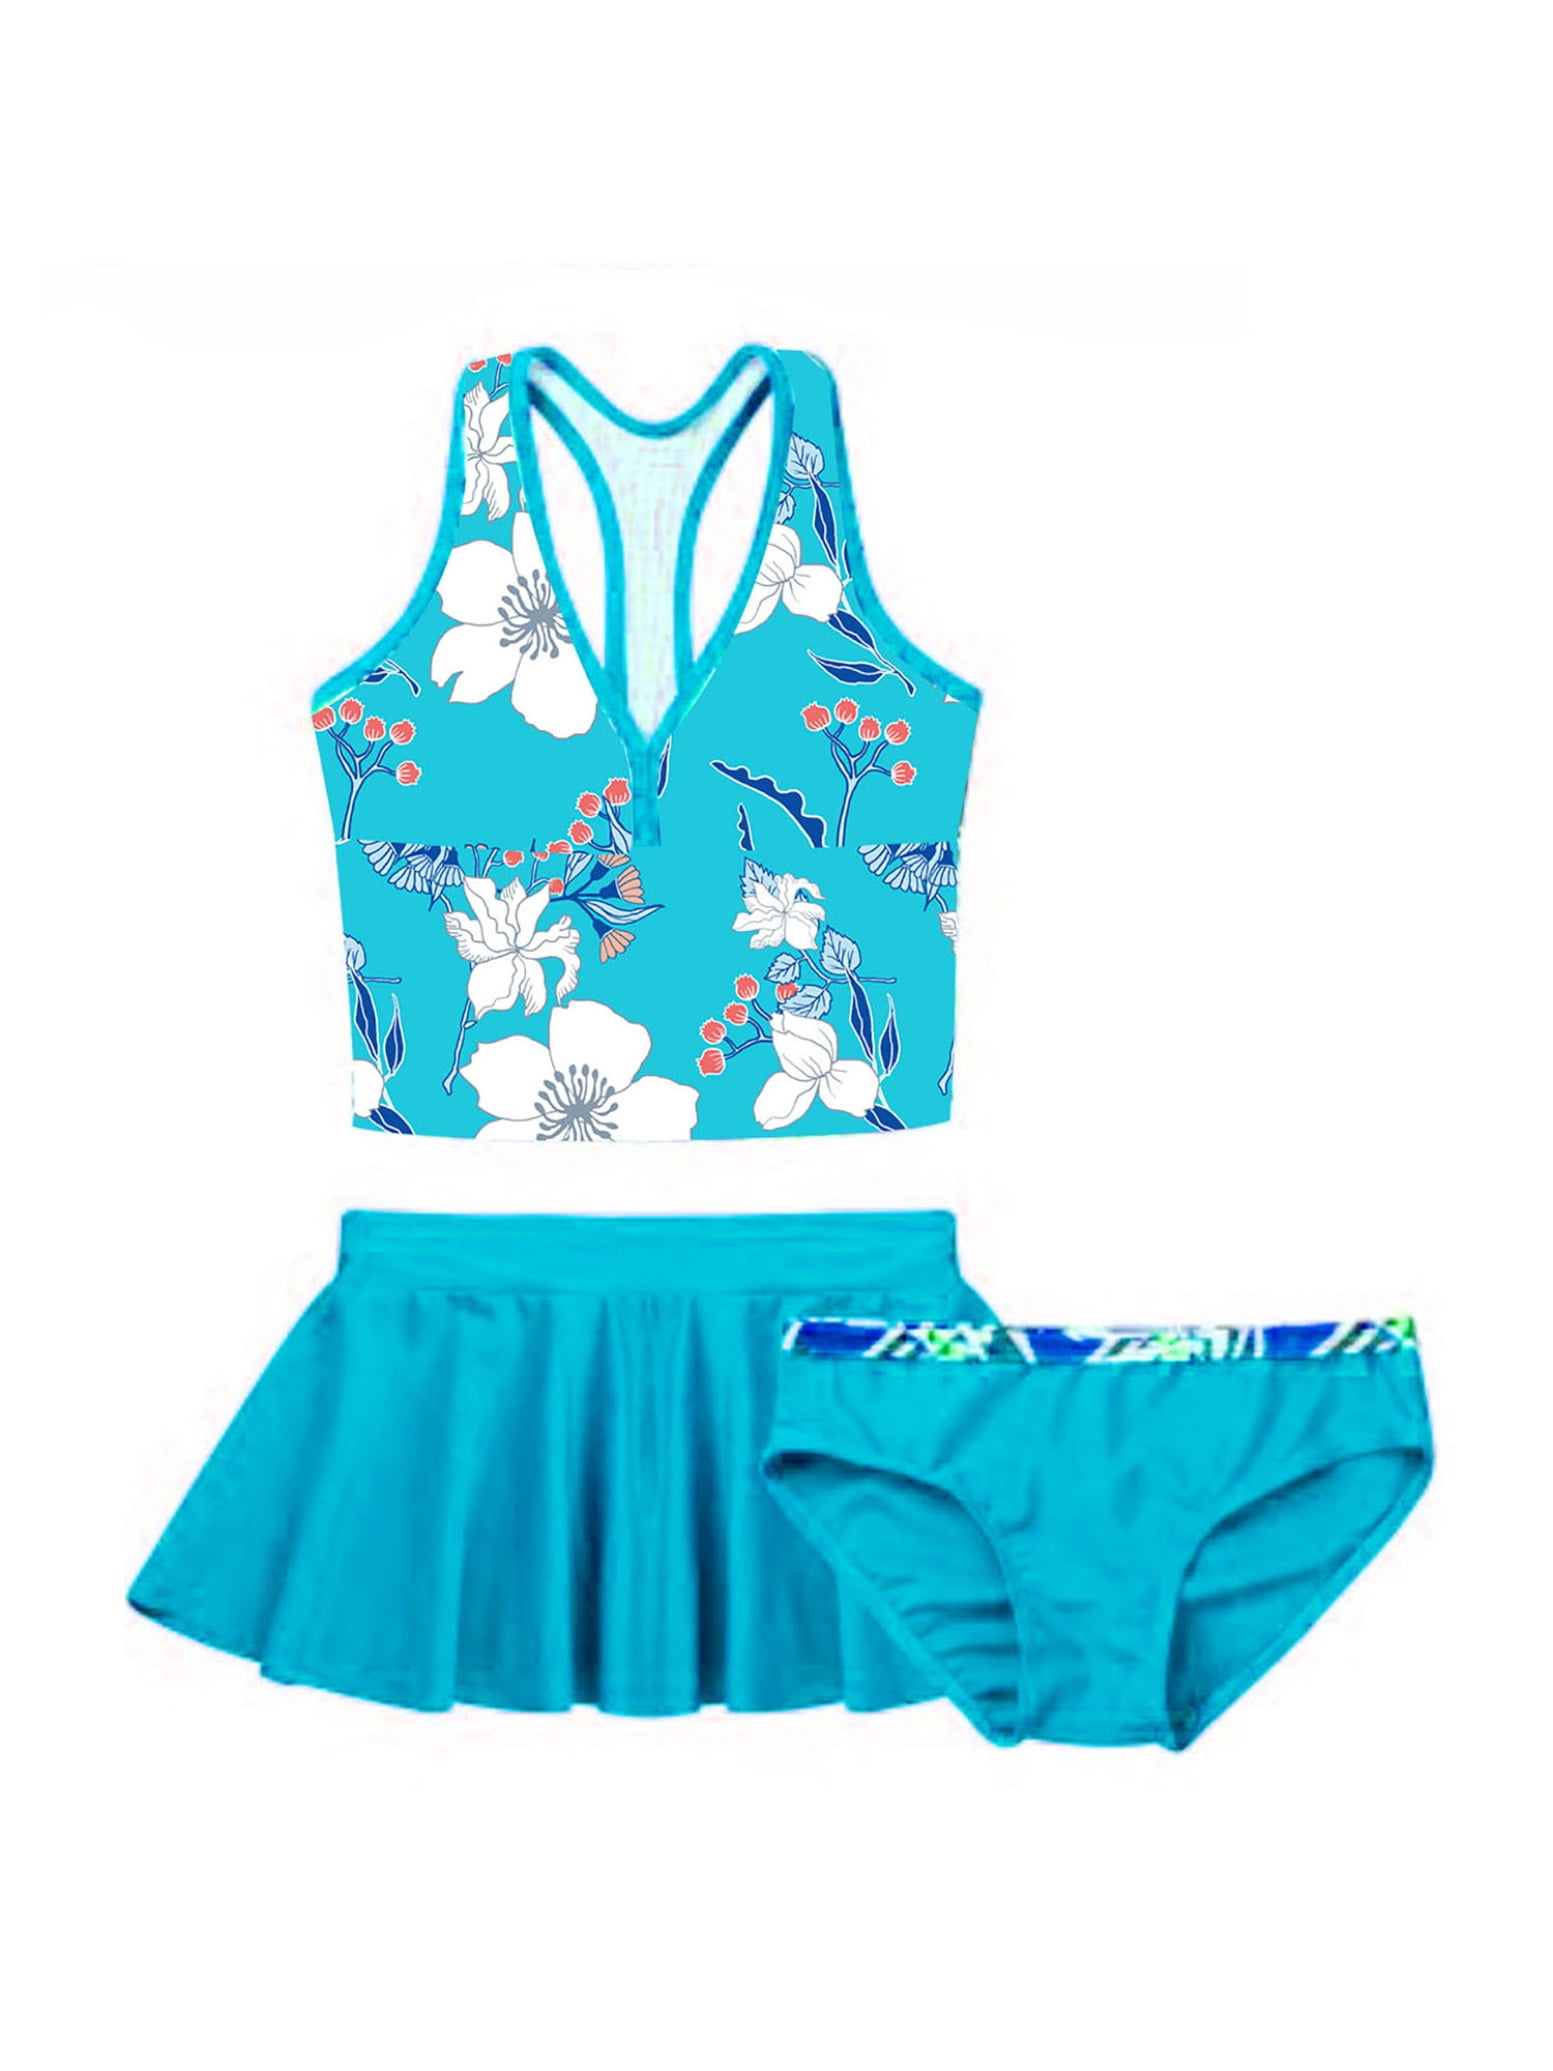 iEFiEL - iEFiEL Girls Floral Tankini Set with Skirt 3pcs Set Swimsuit ...